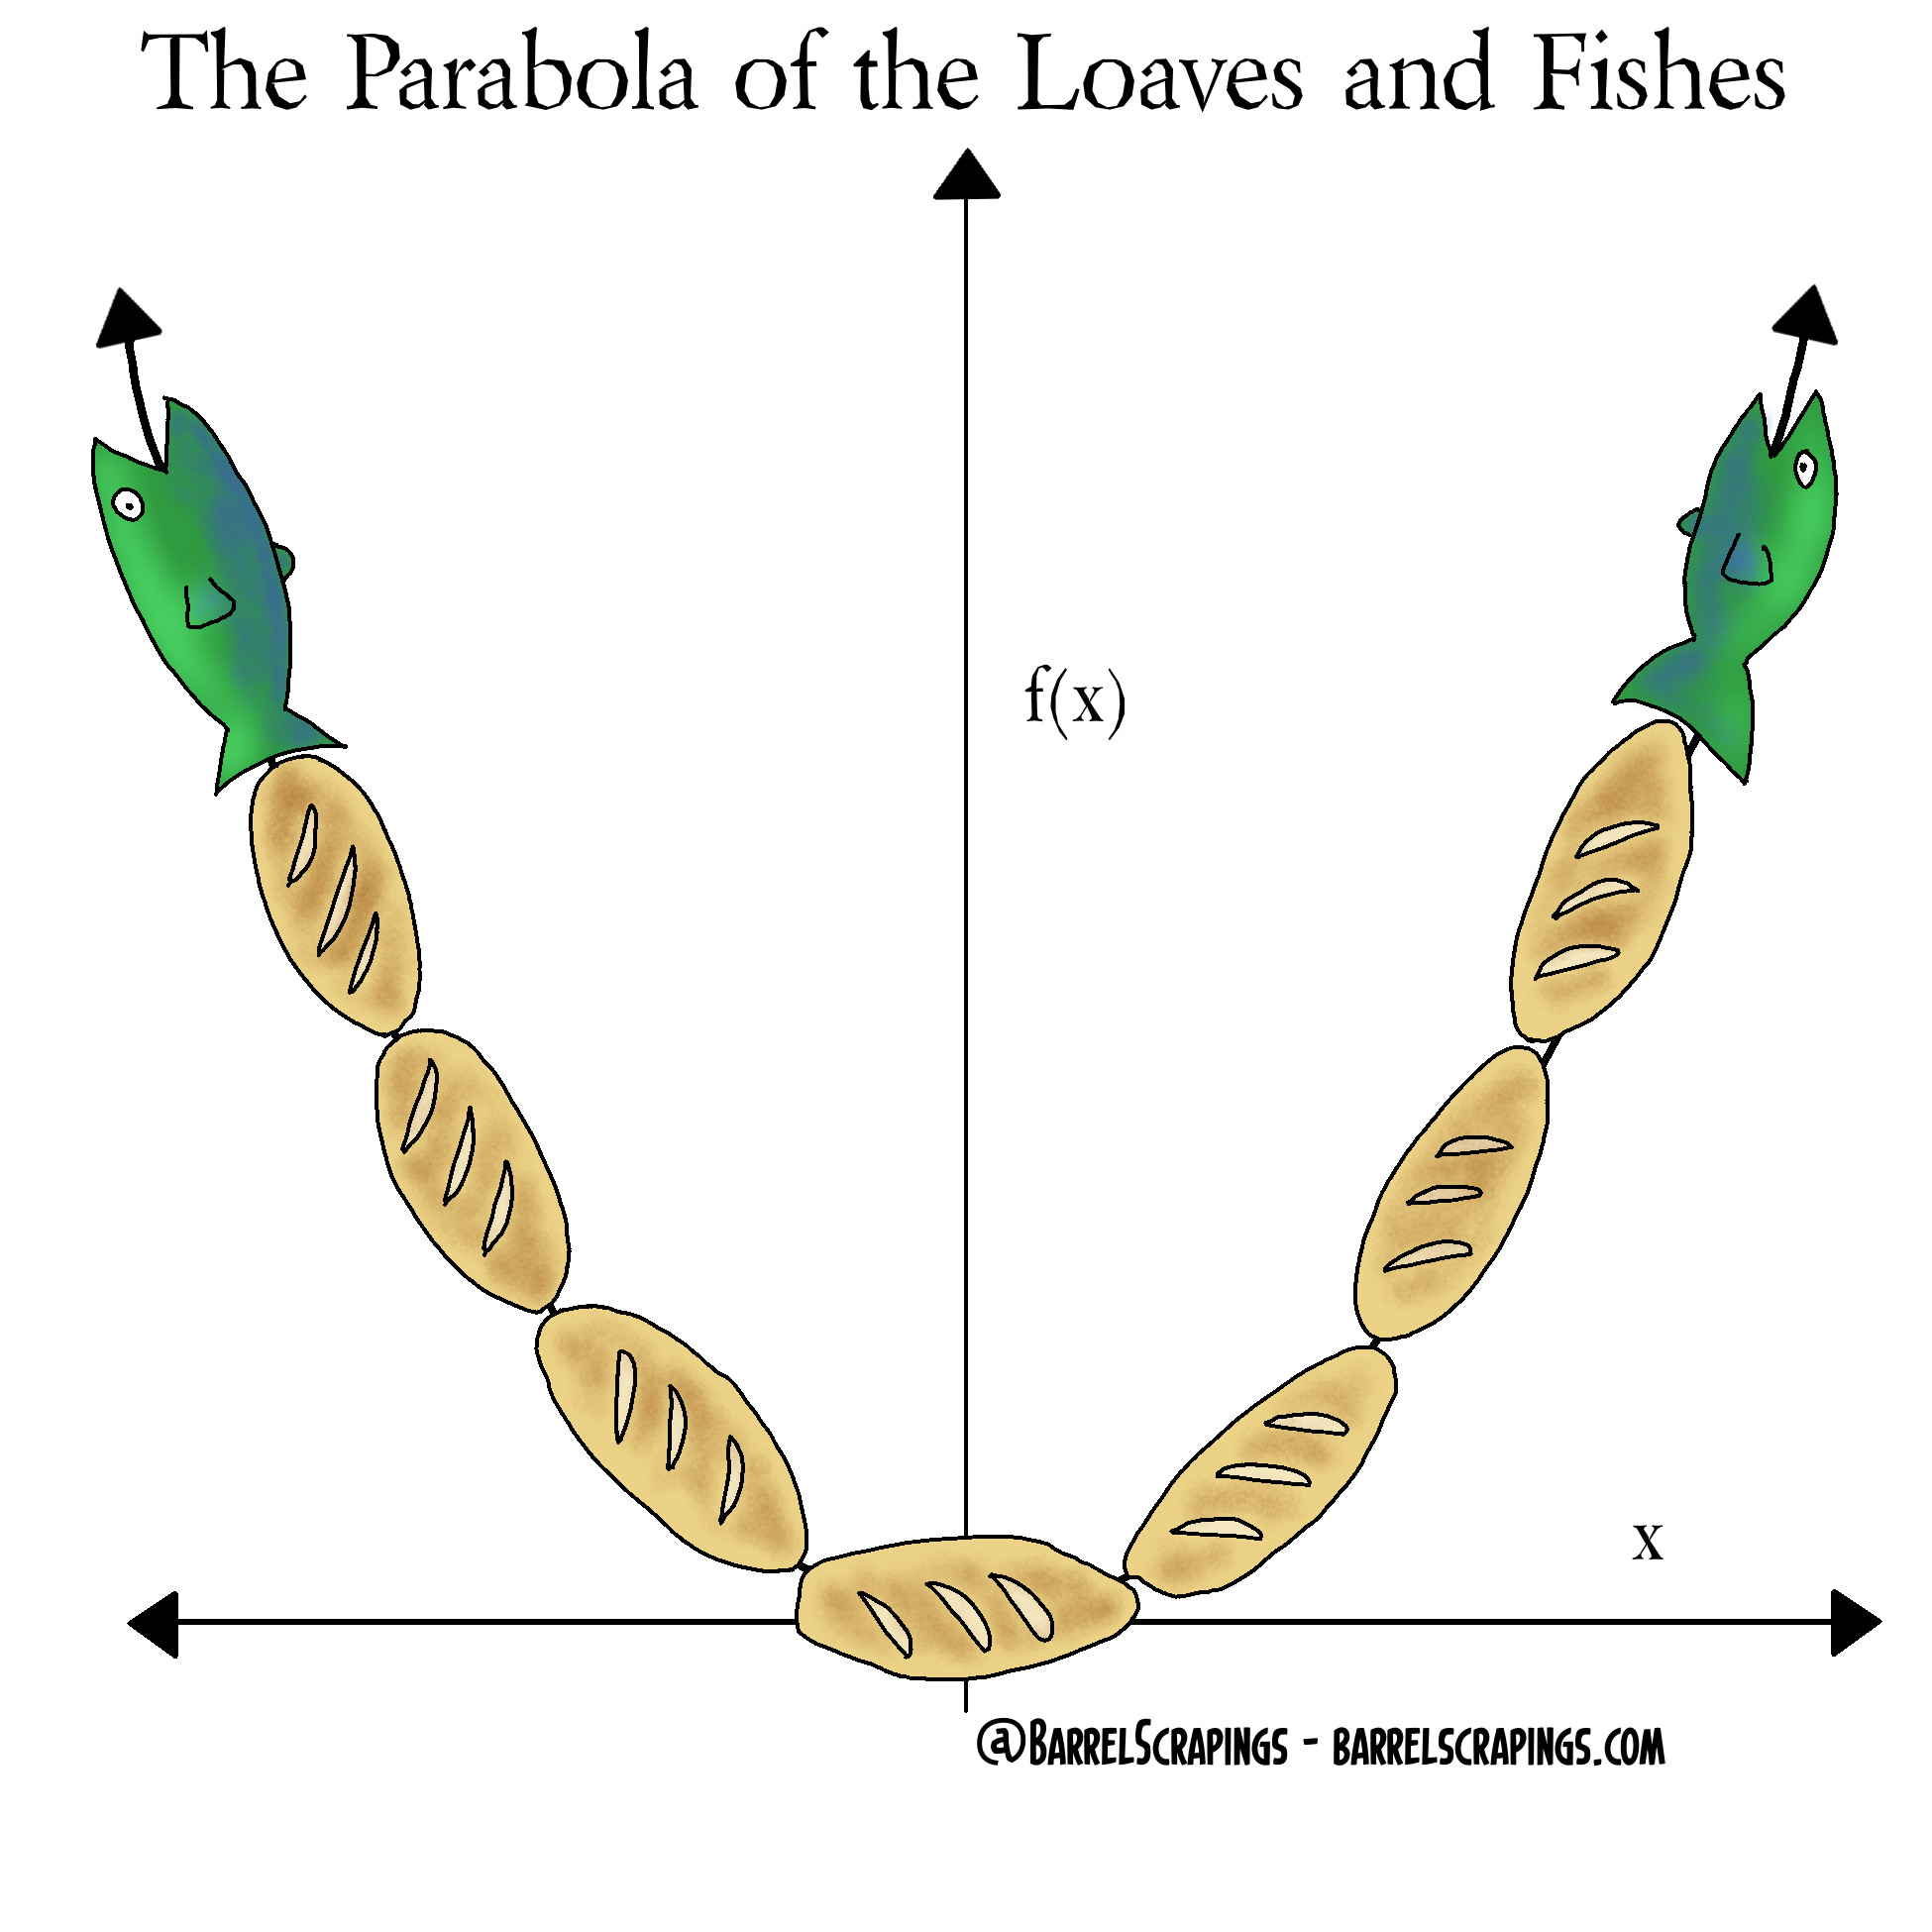 image from The Parabola of the Loaves and Fishes